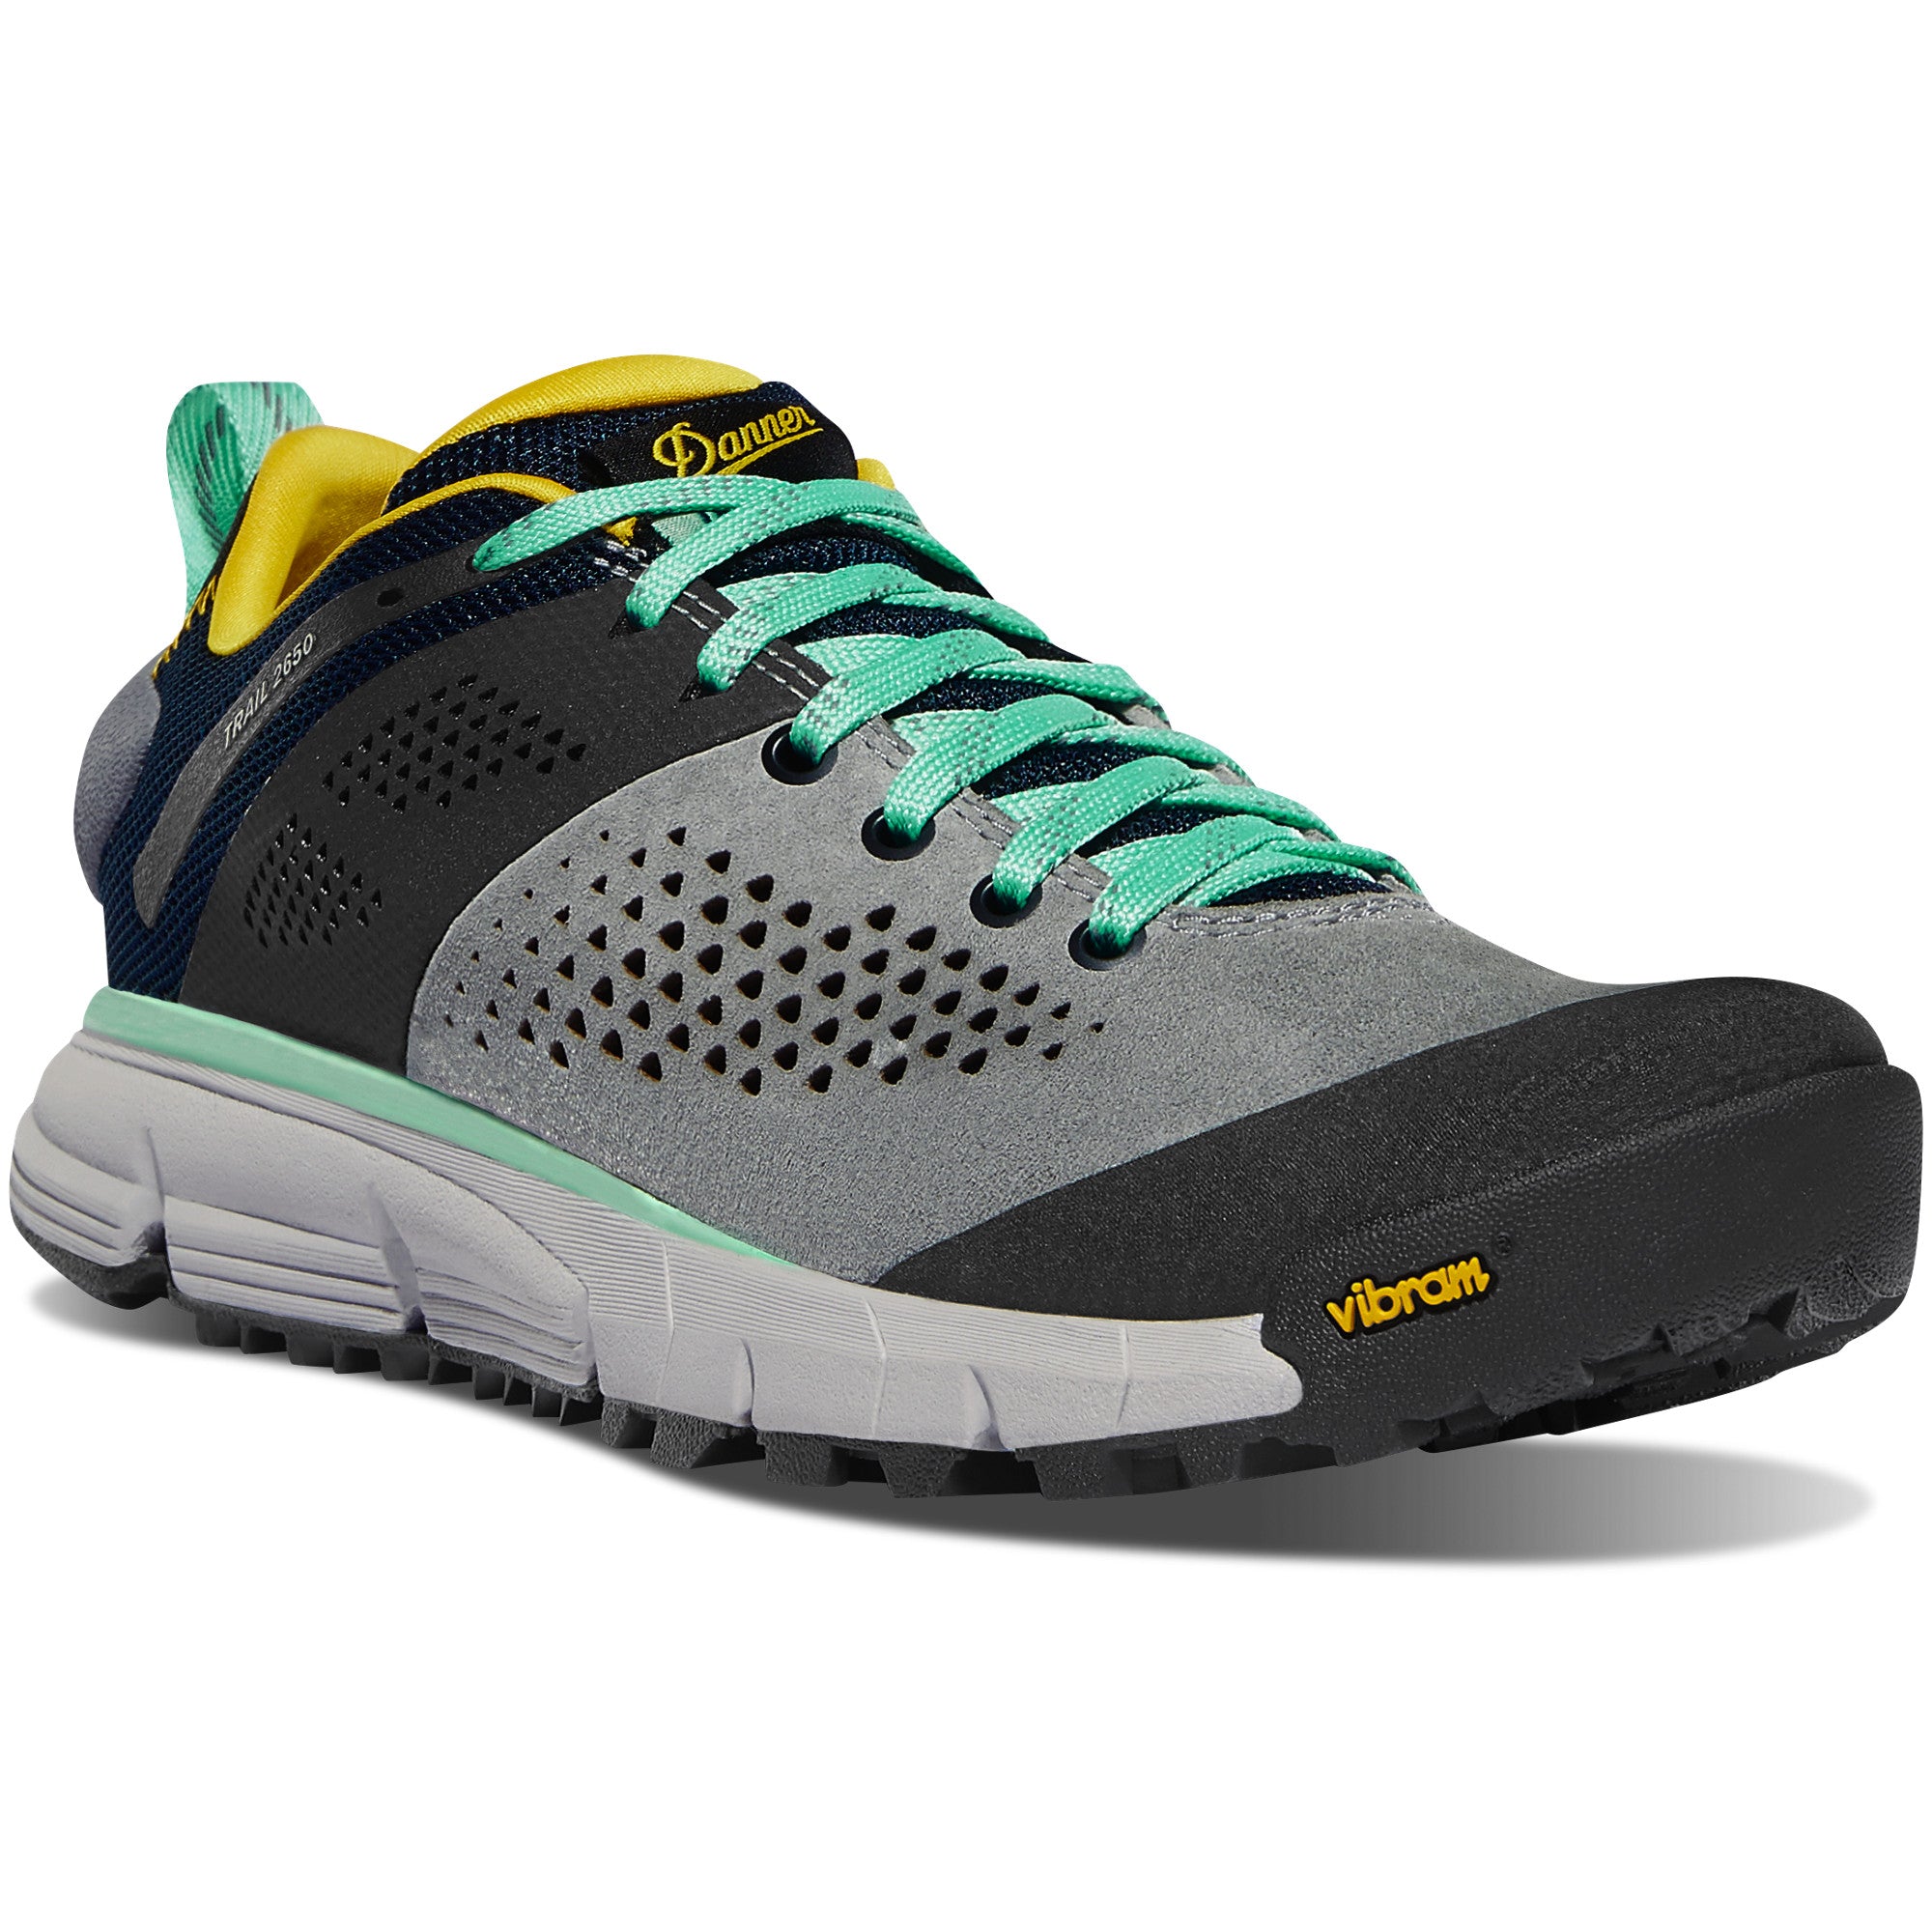 Danner Women's Trail 2650 3" Hiking Shoe in Gray/Blue/Spectra Yellow from the side